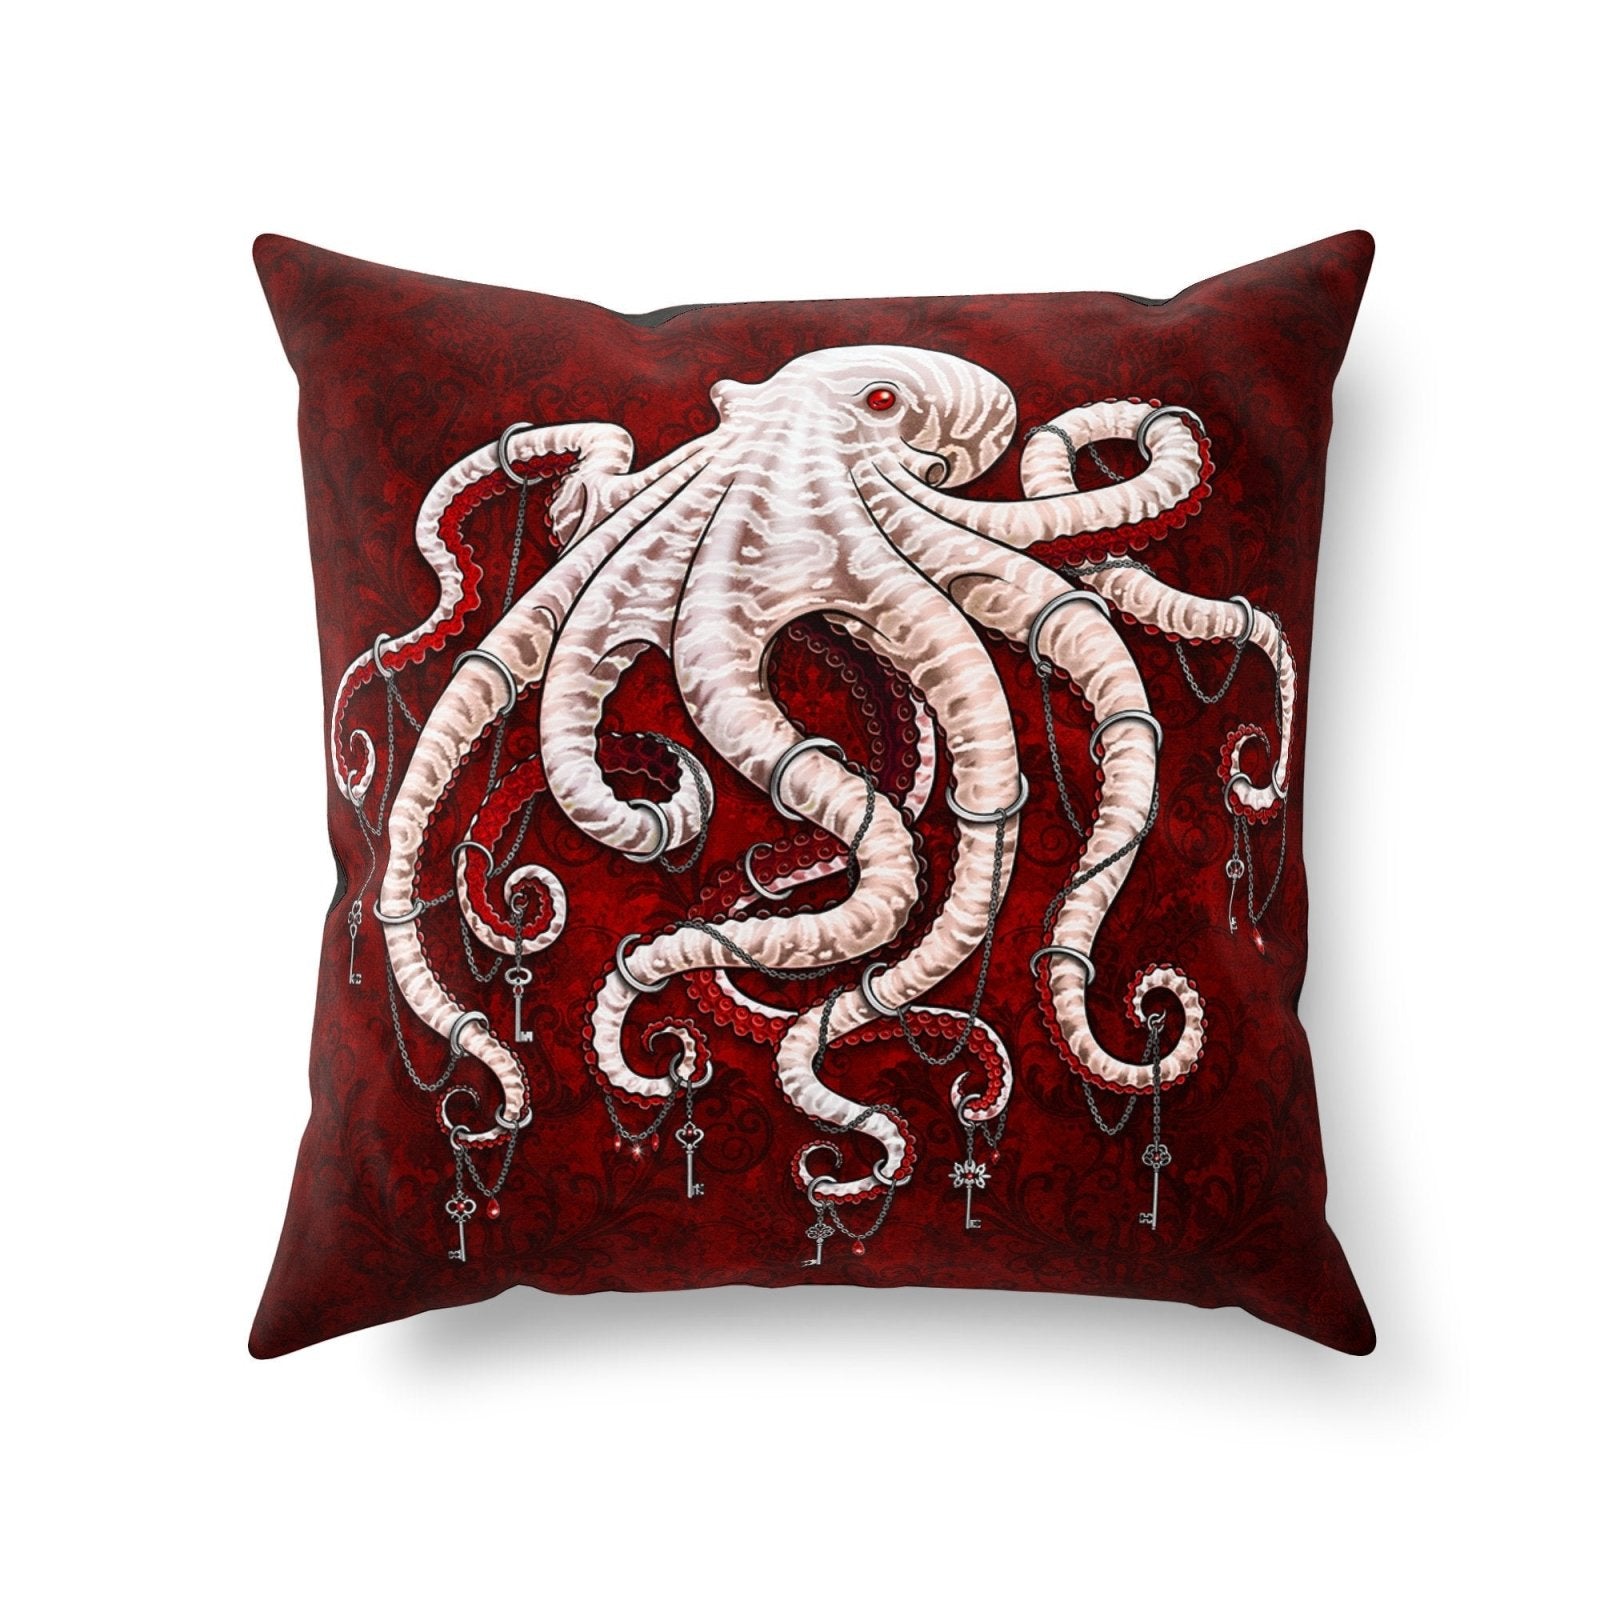 https://www.abysm-internal.com/cdn/shop/products/goth-throw-pillow-decorative-accent-pillow-square-cushion-cover-gothic-room-decor-dark-art-alternative-home-bloody-white-and-red-octopus-abysm-internal-466224.jpg?v=1689626378&width=1600